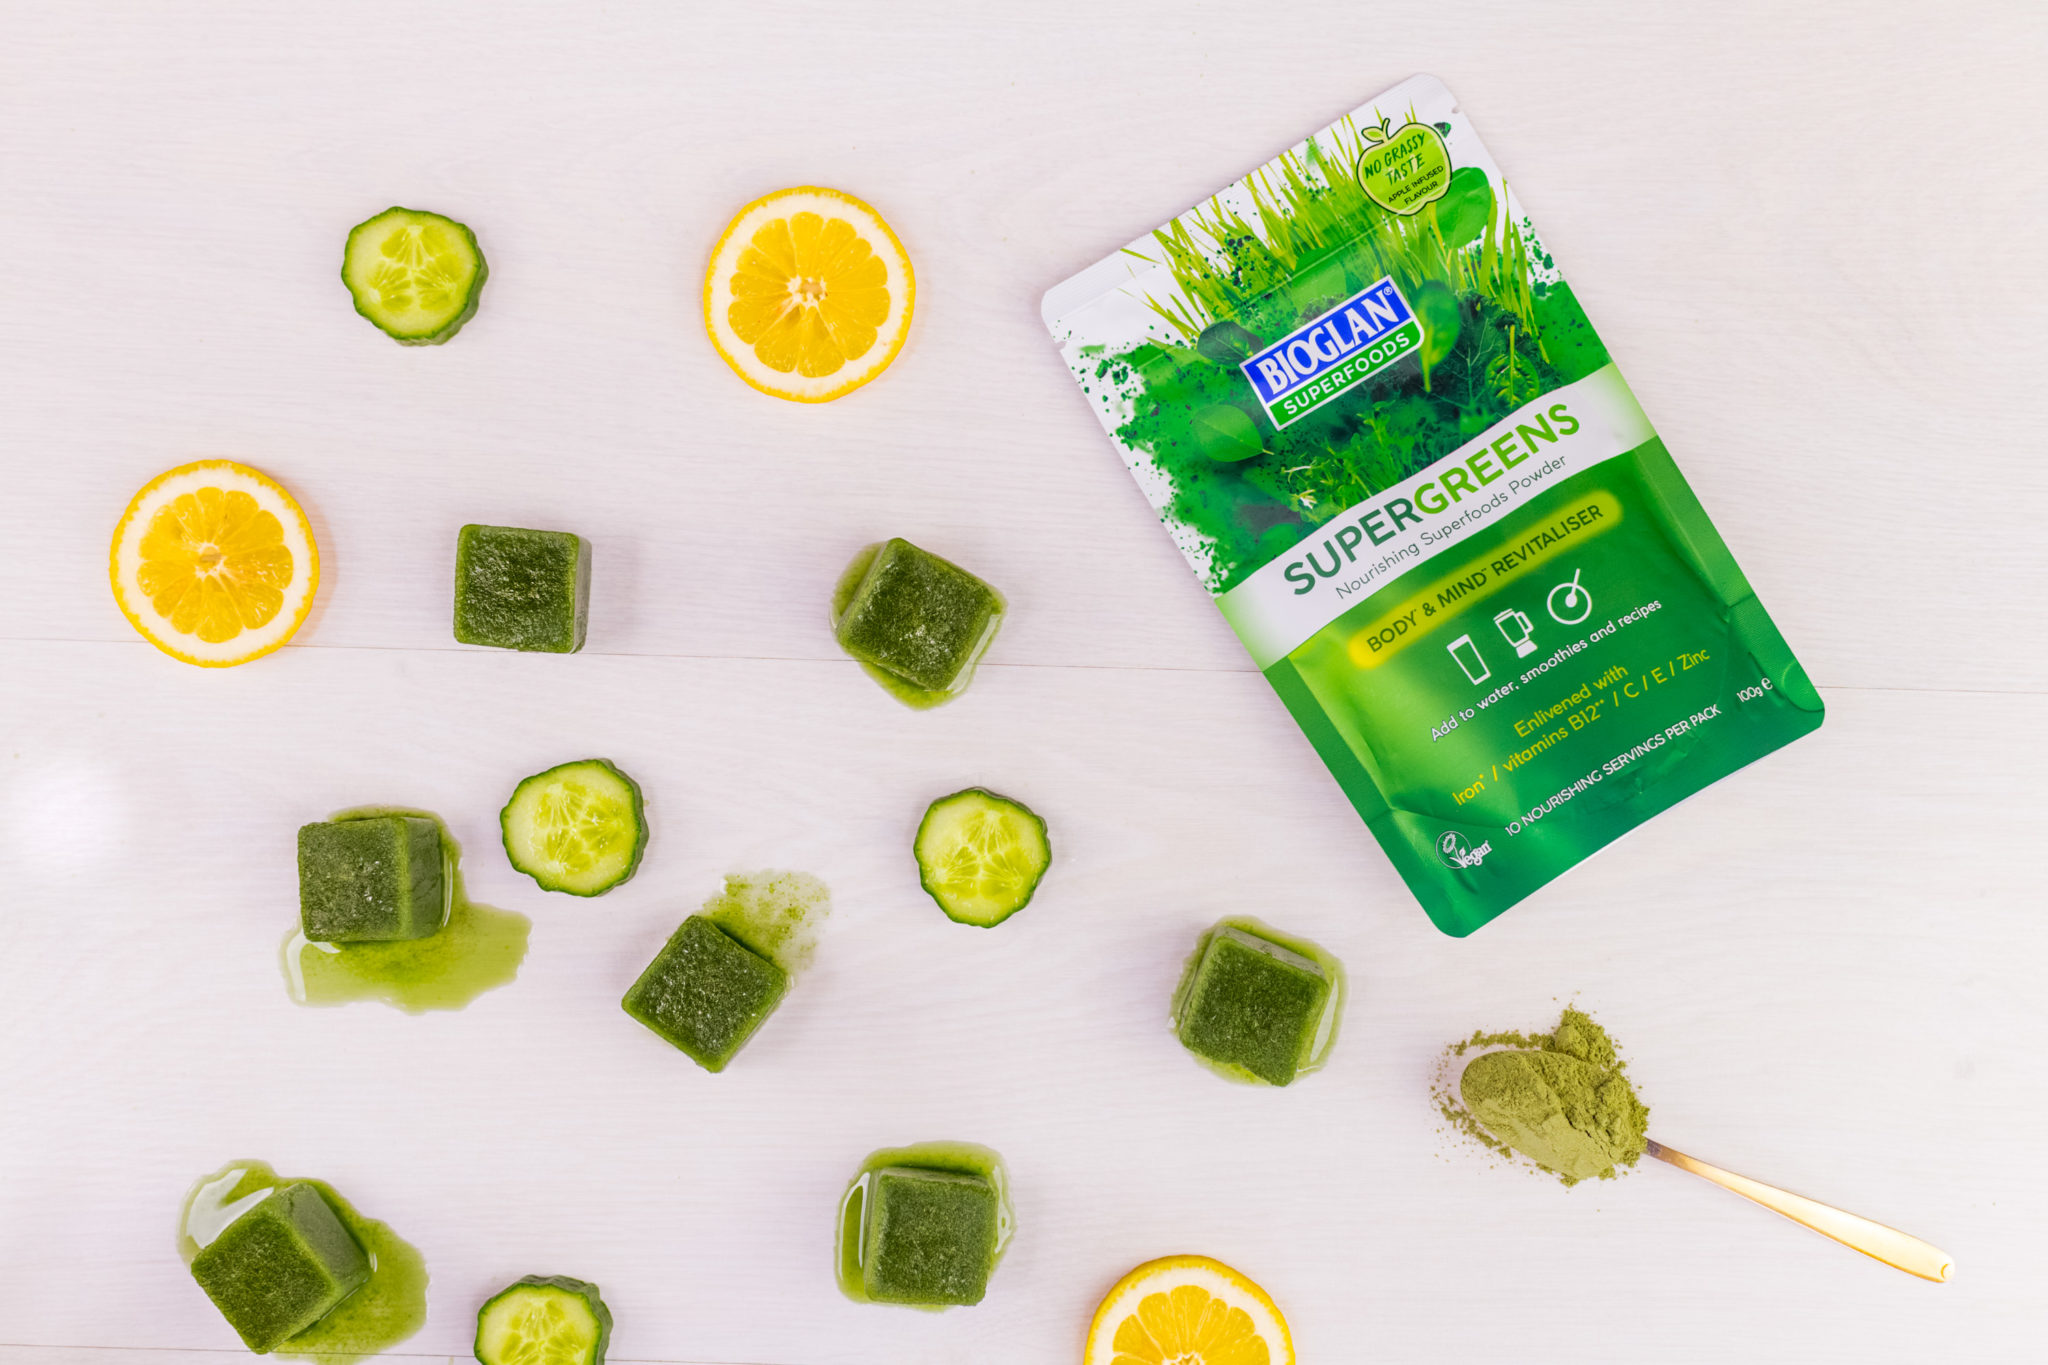 Supergreens water boosters